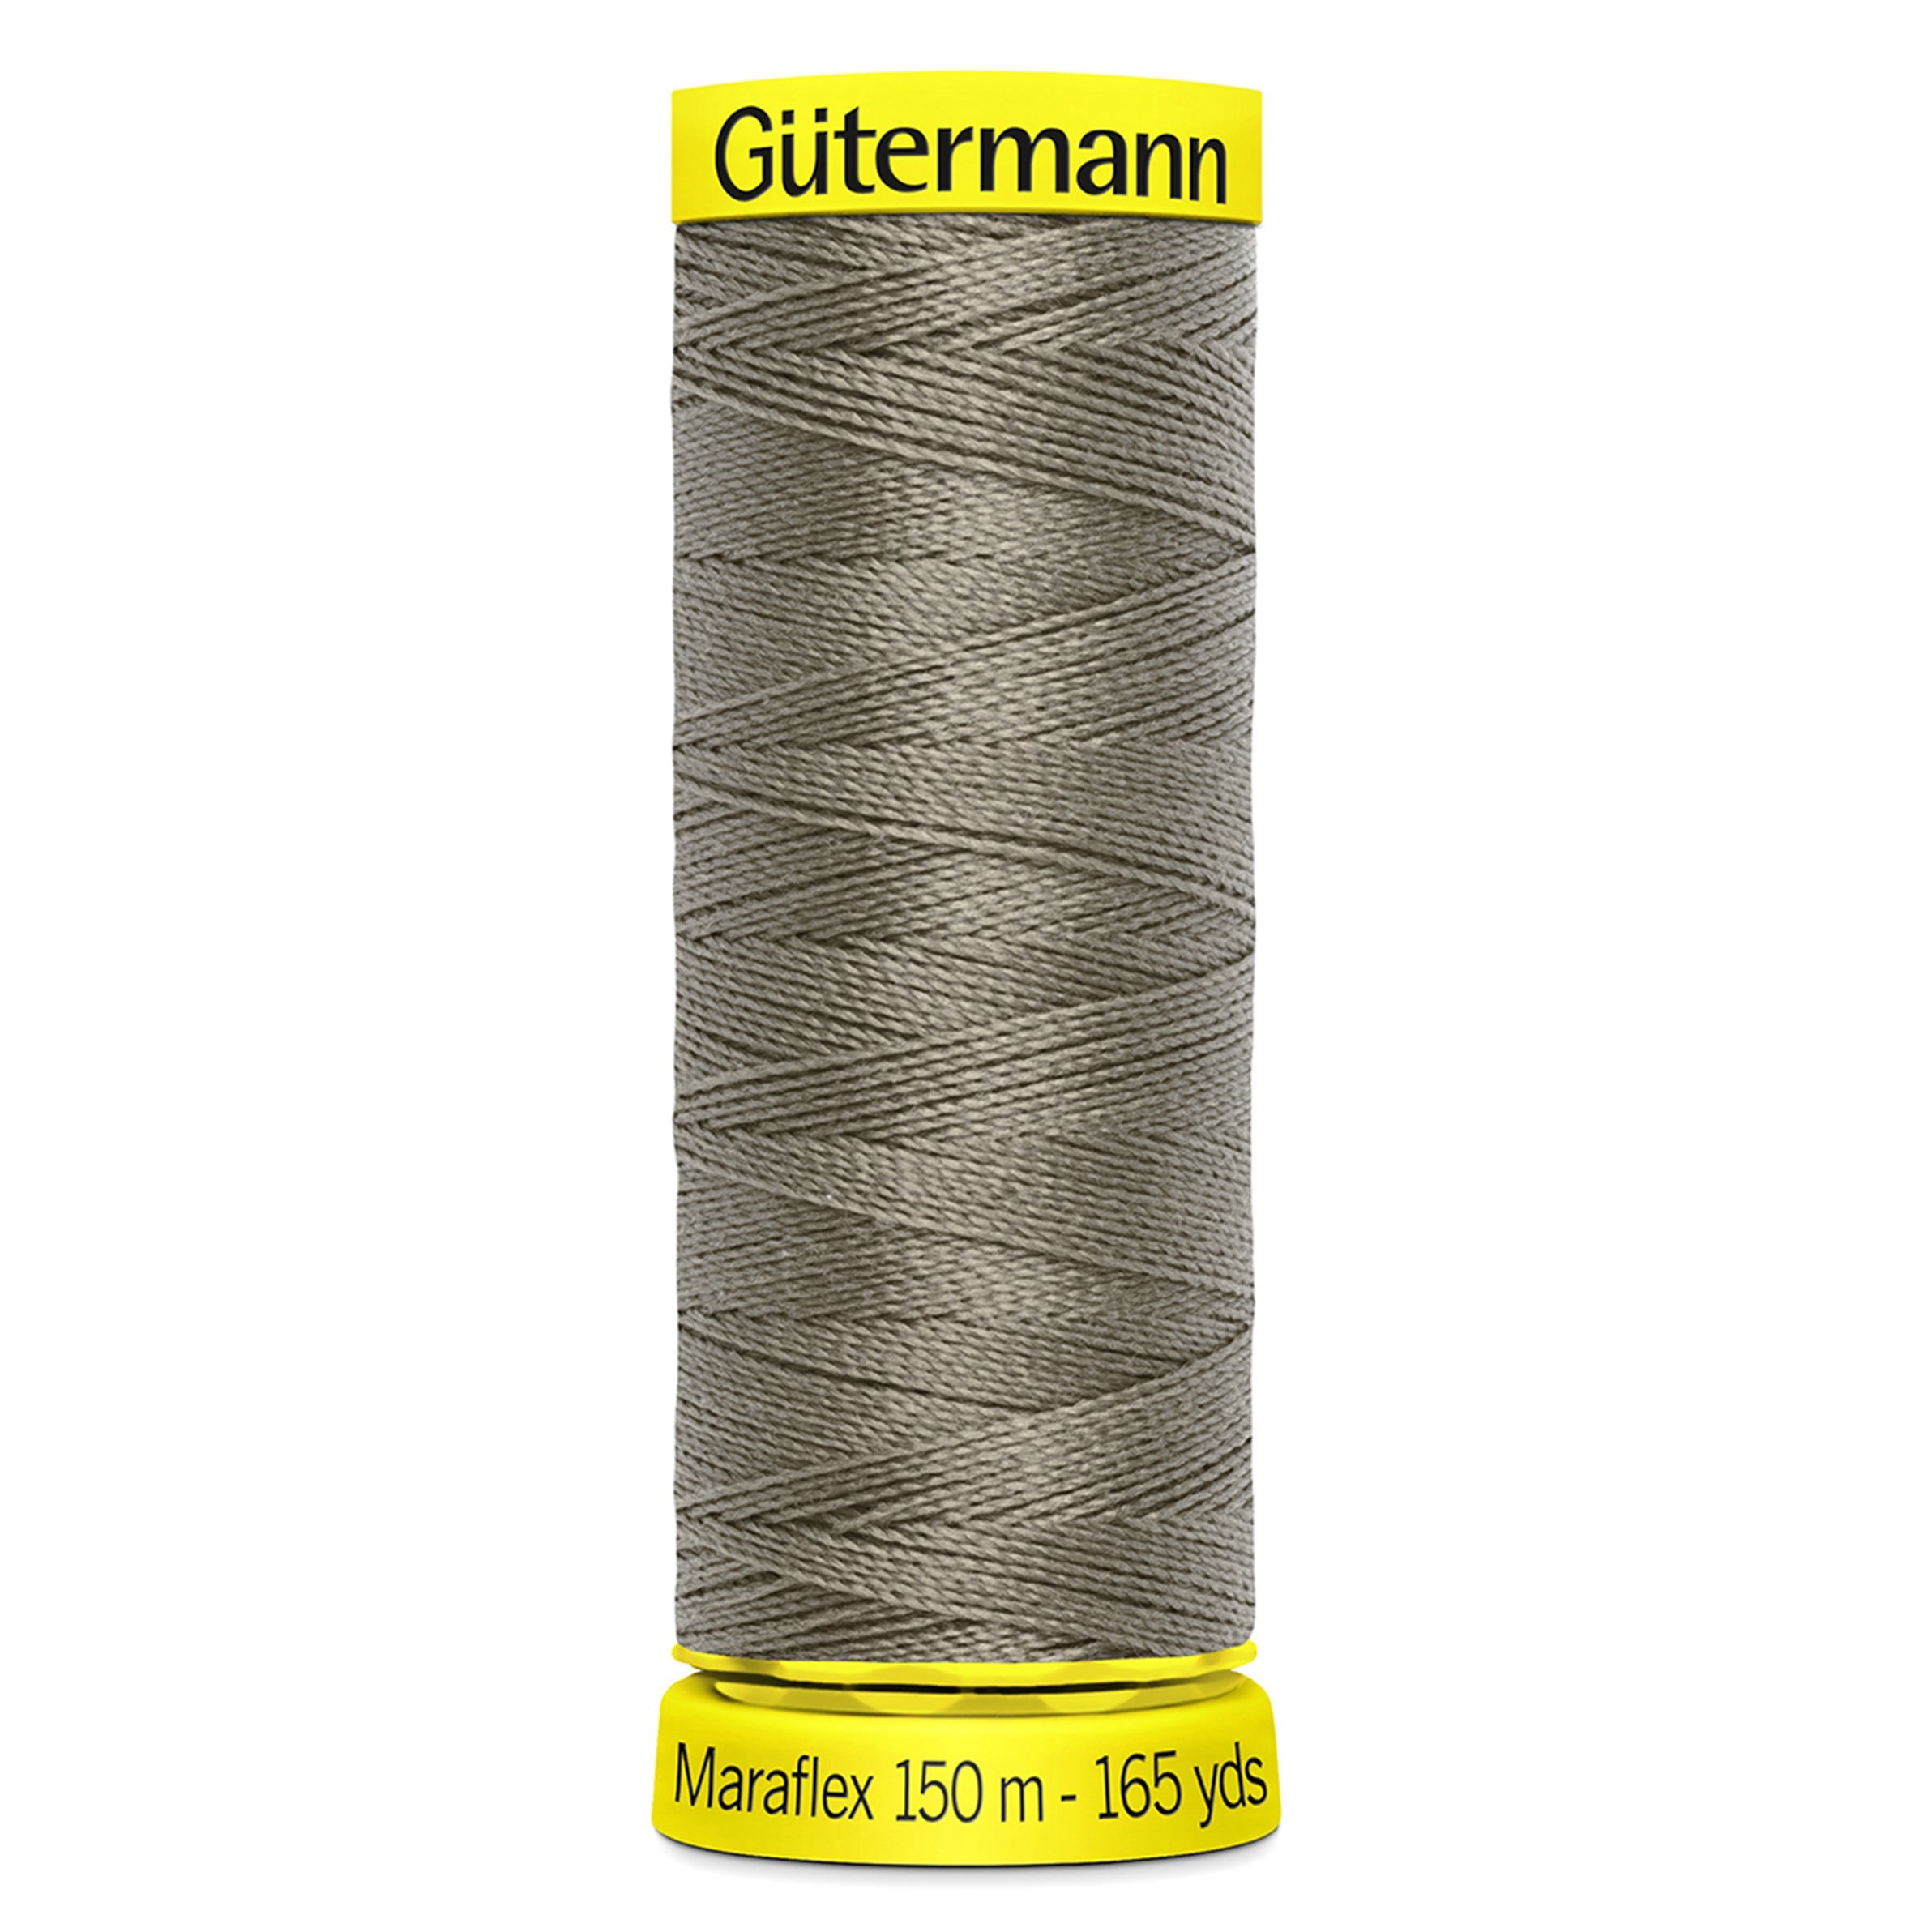 Gutermann Maraflex Stretchy Sewing Thread 150m colour 727 from Jaycotts Sewing Supplies